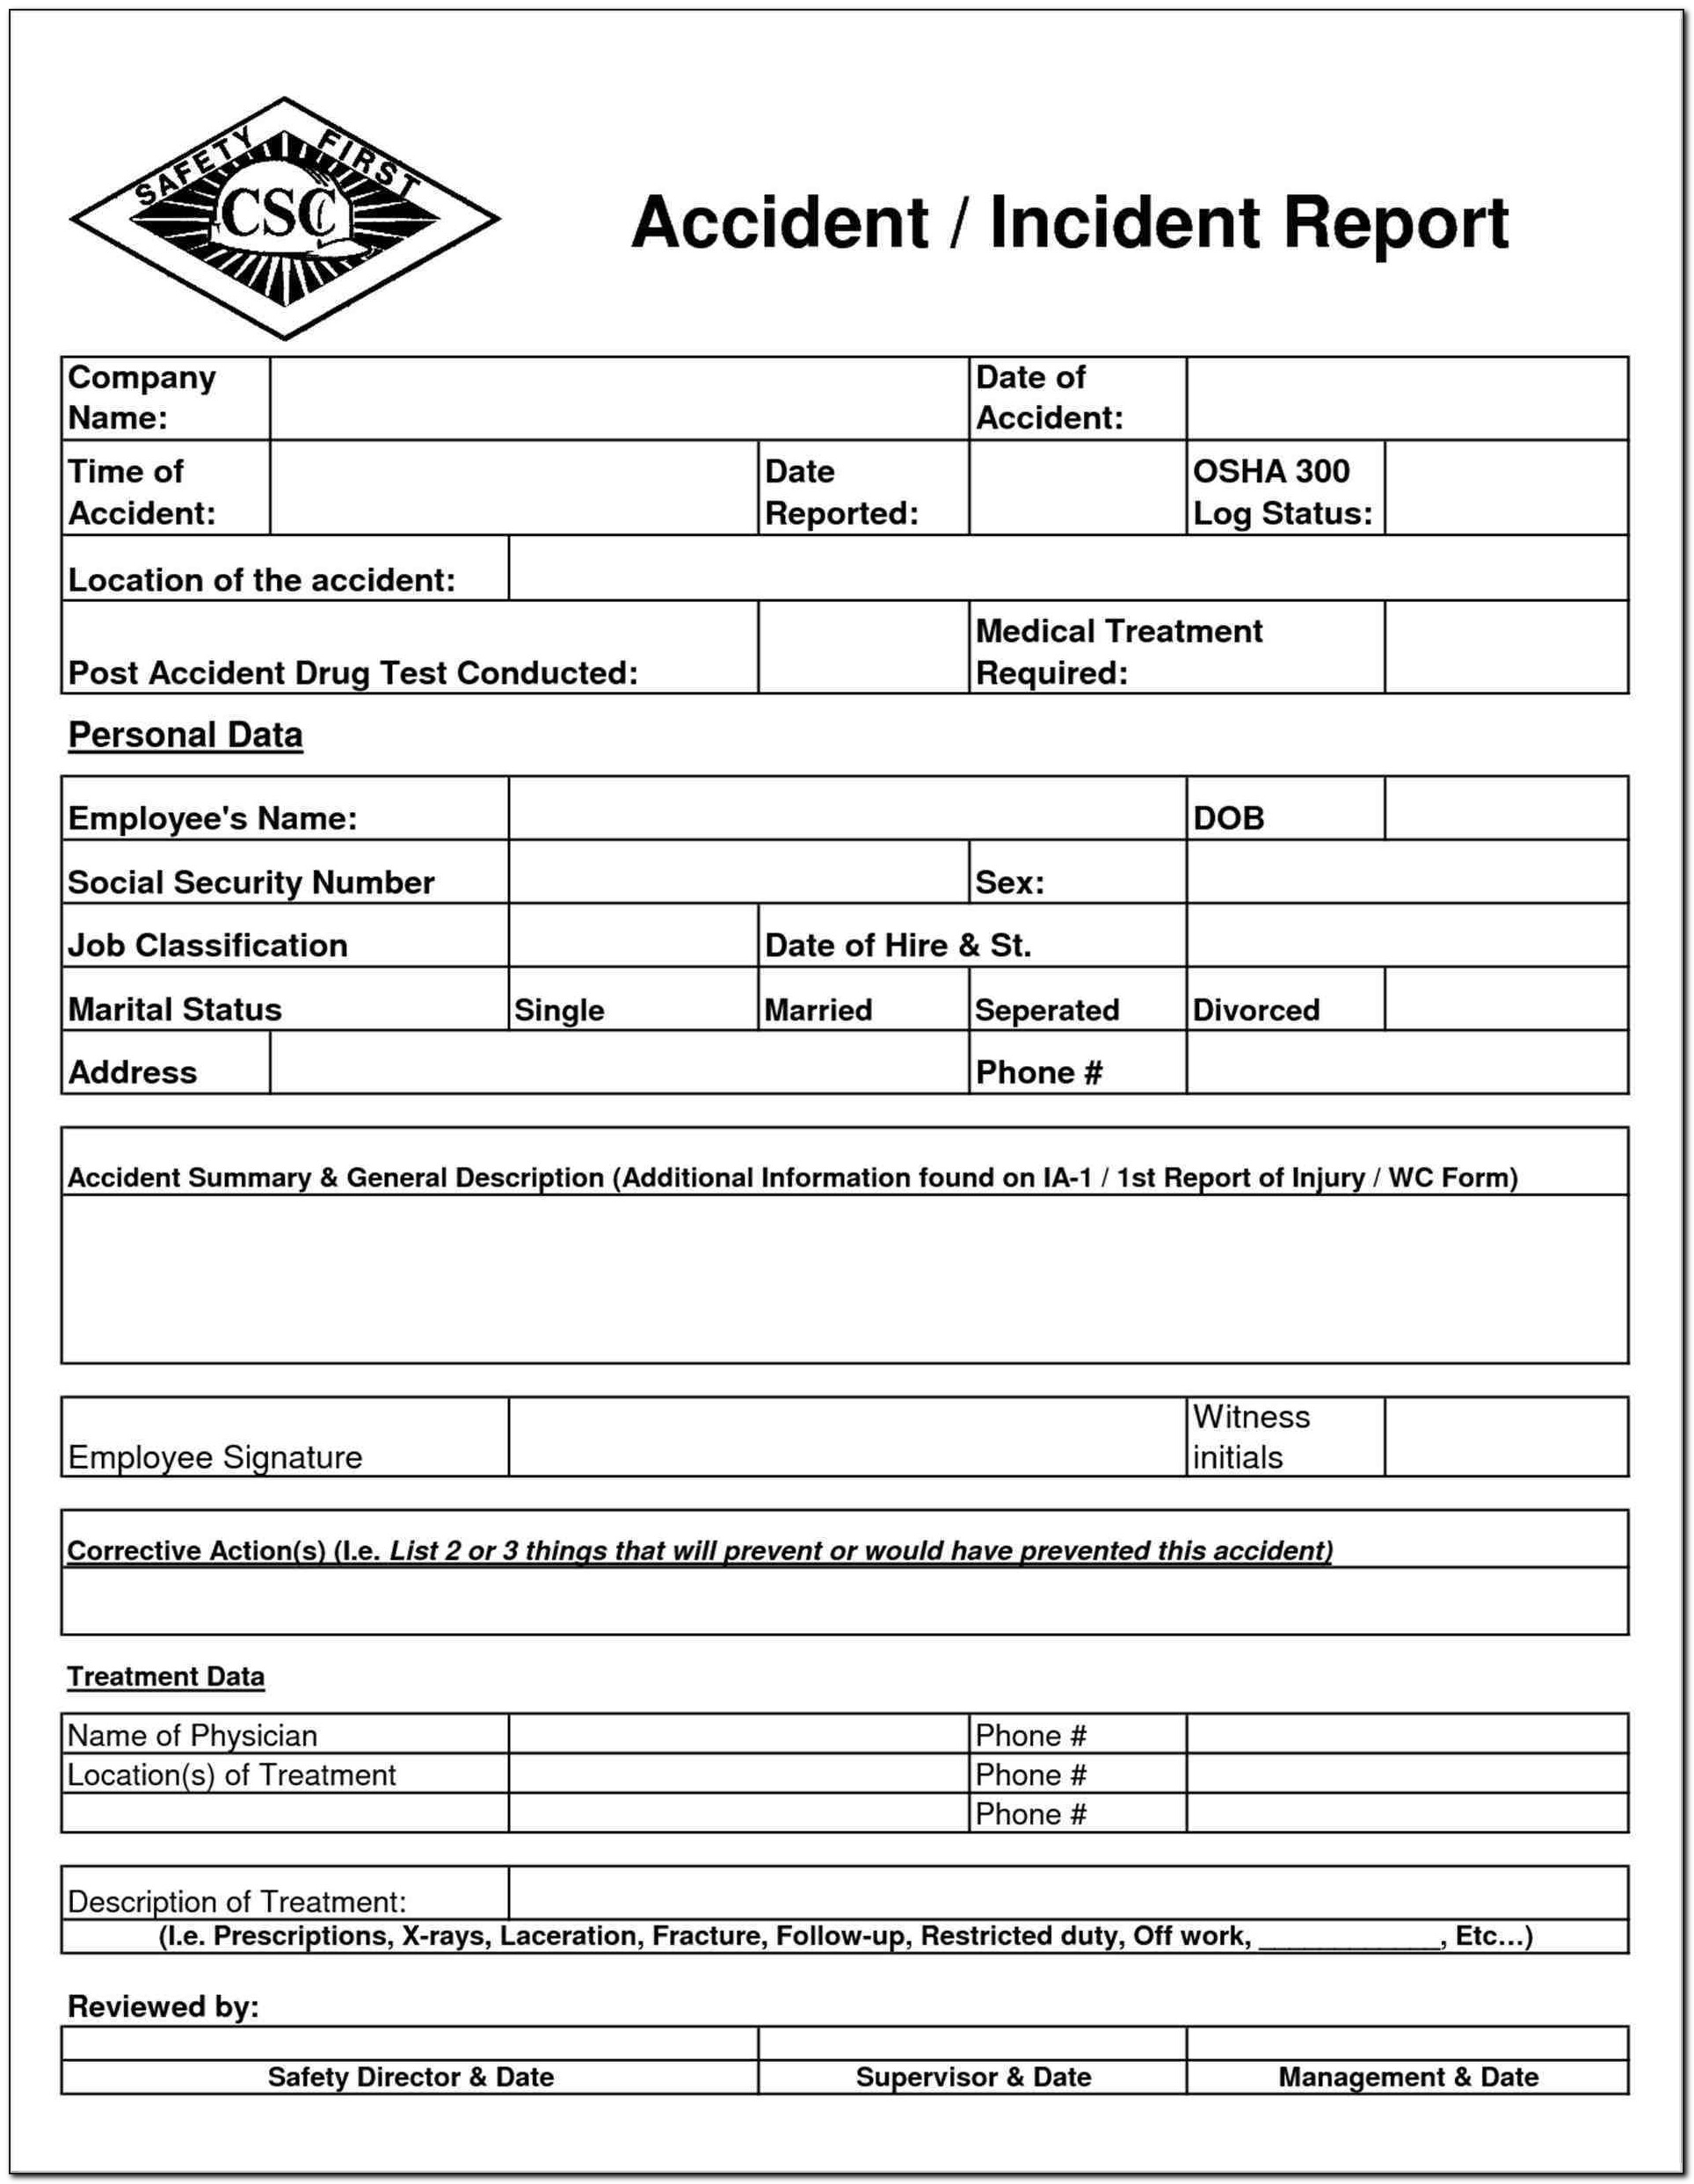 Tailgate Safety Meeting Form – Form : Resume Examples #Erkknqjon8 Regarding Health And Safety Incident Report Form Template